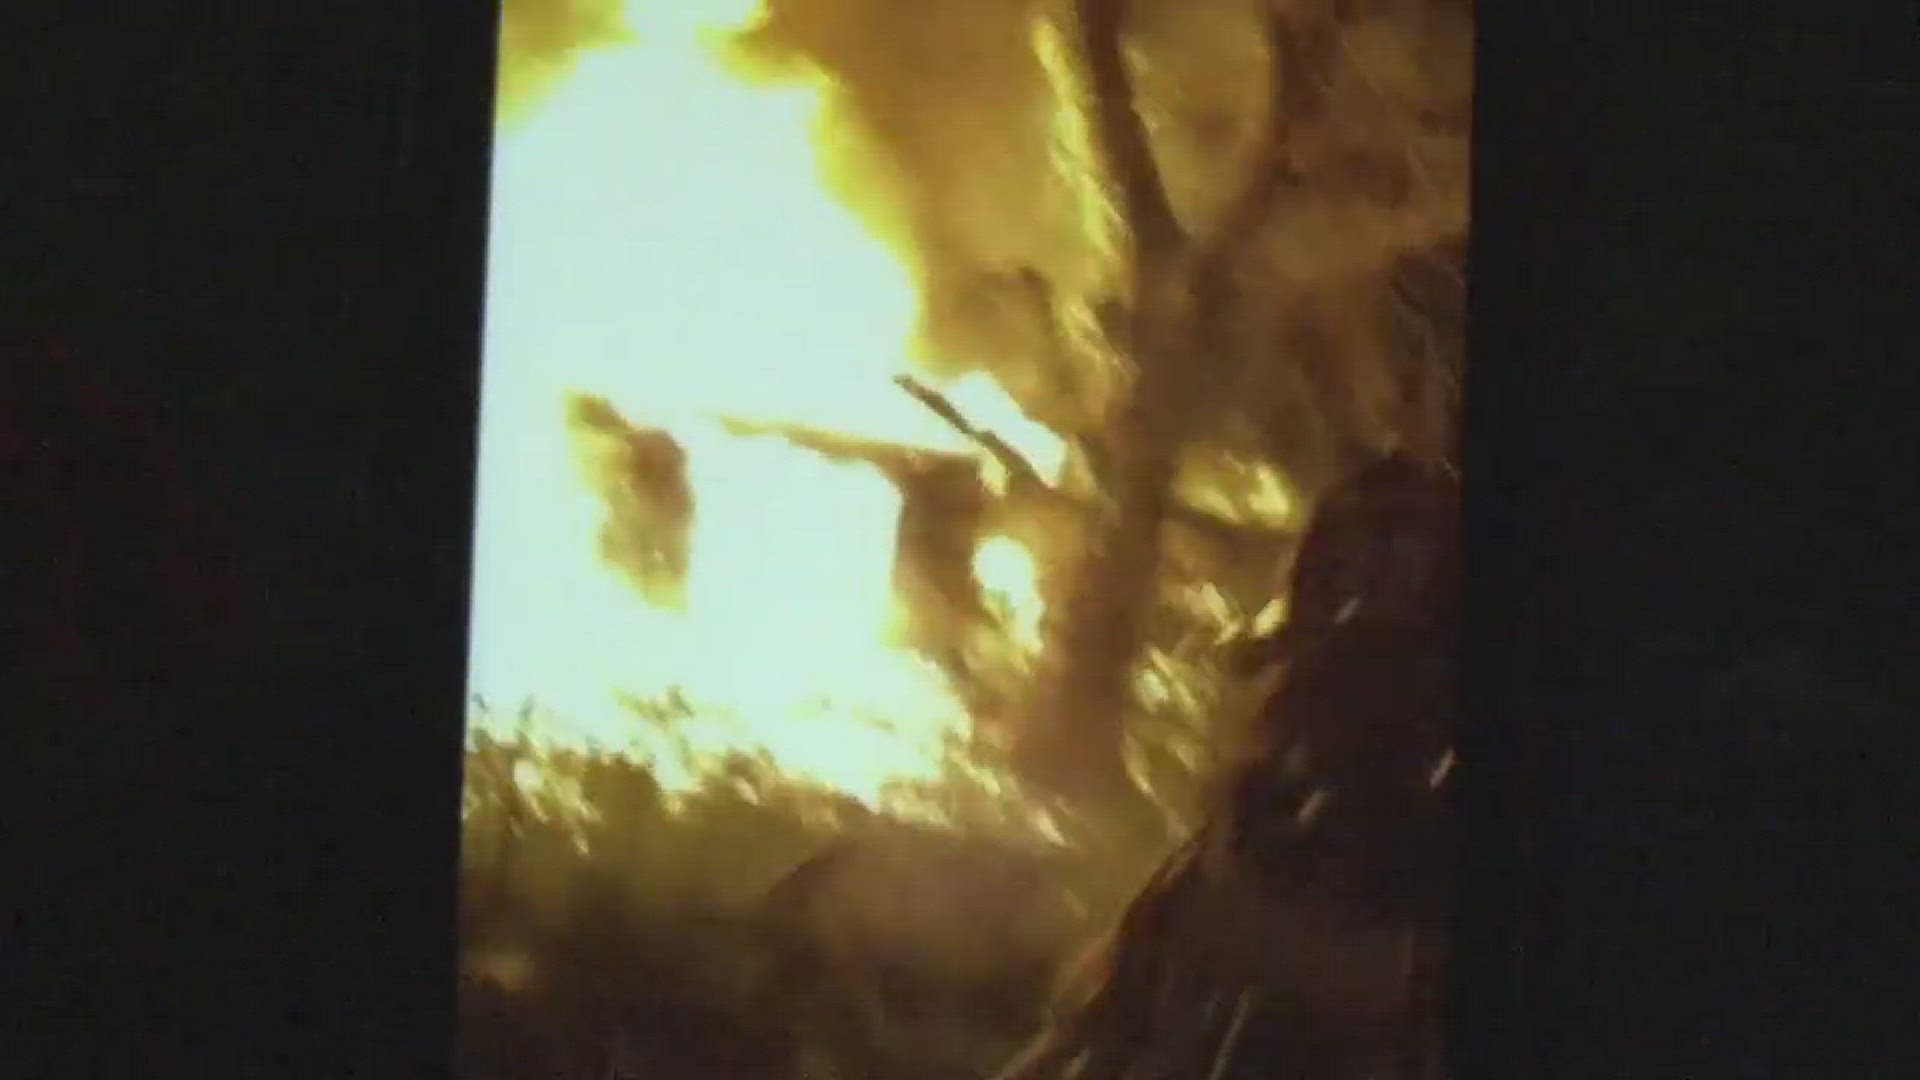 A neighbor got quite a scare when a vacant house near their north Houston home caught fire overnight.